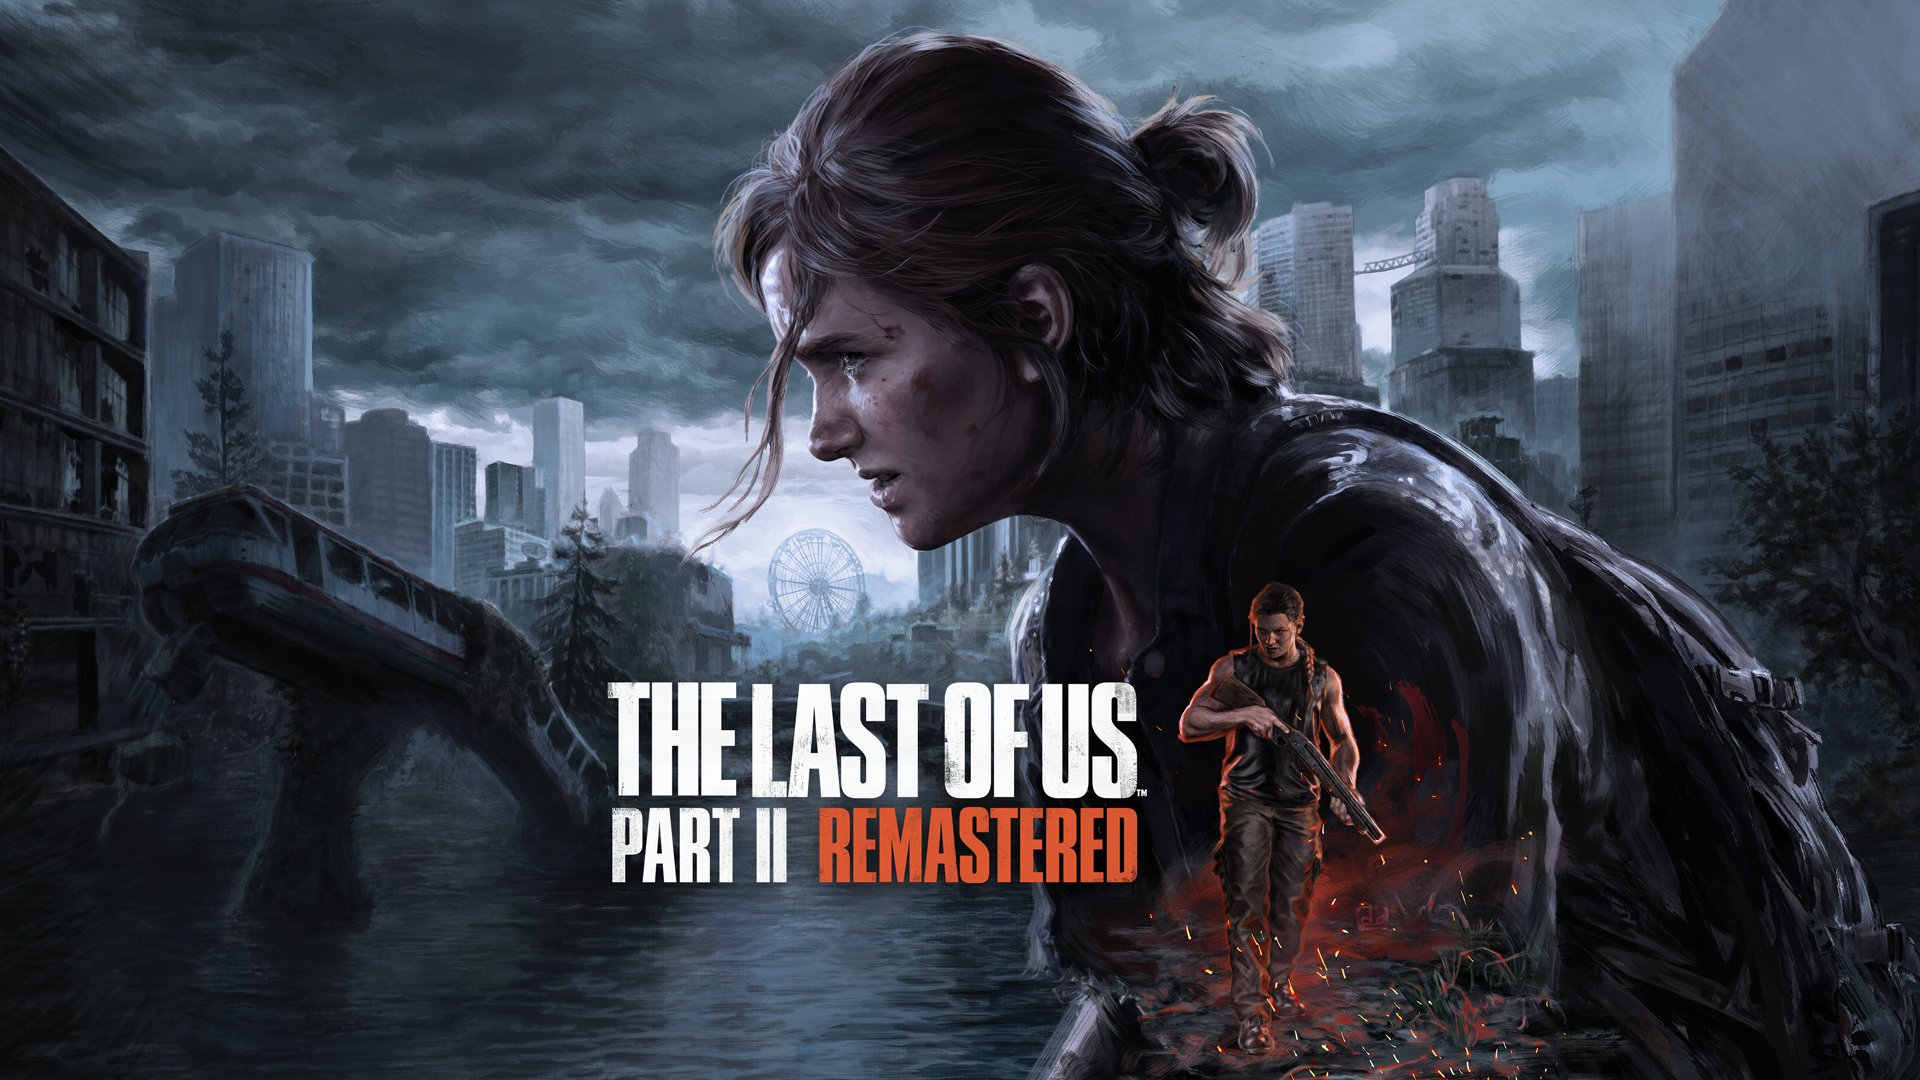 Do You Need to Play The Last of Us Before The Last of Us Part 2?